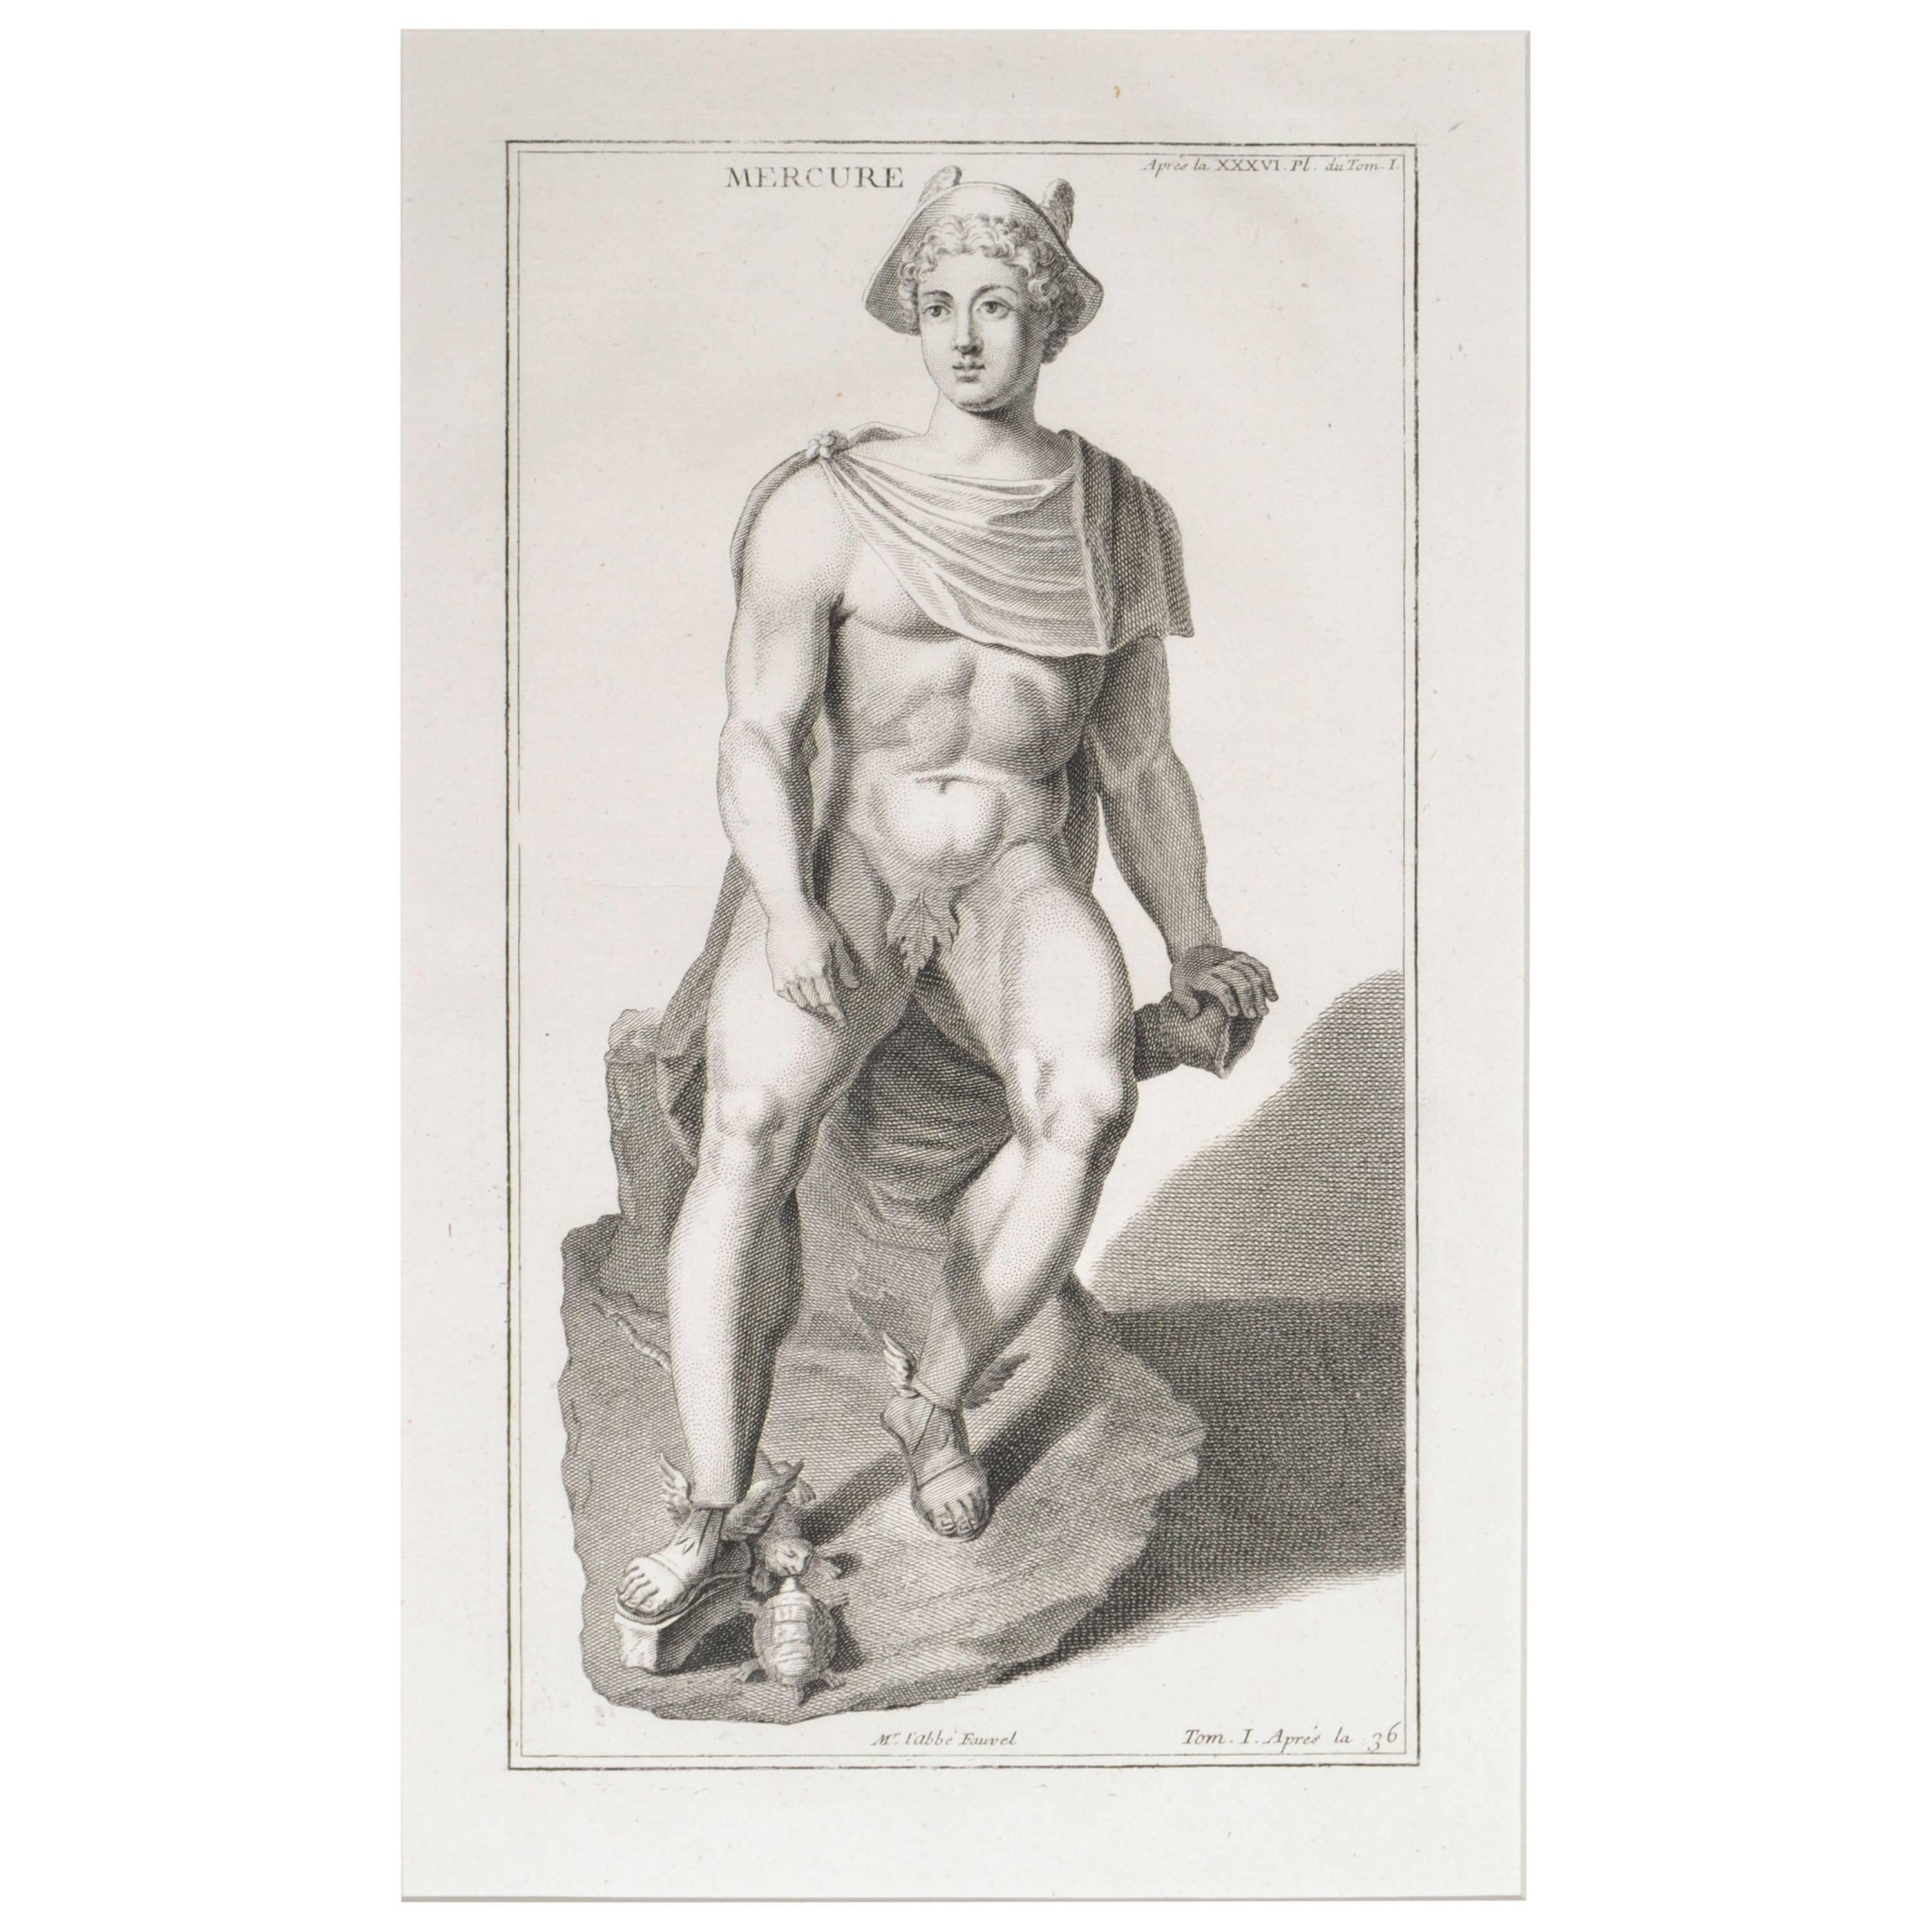 Mercury, a Copperplate Engraving